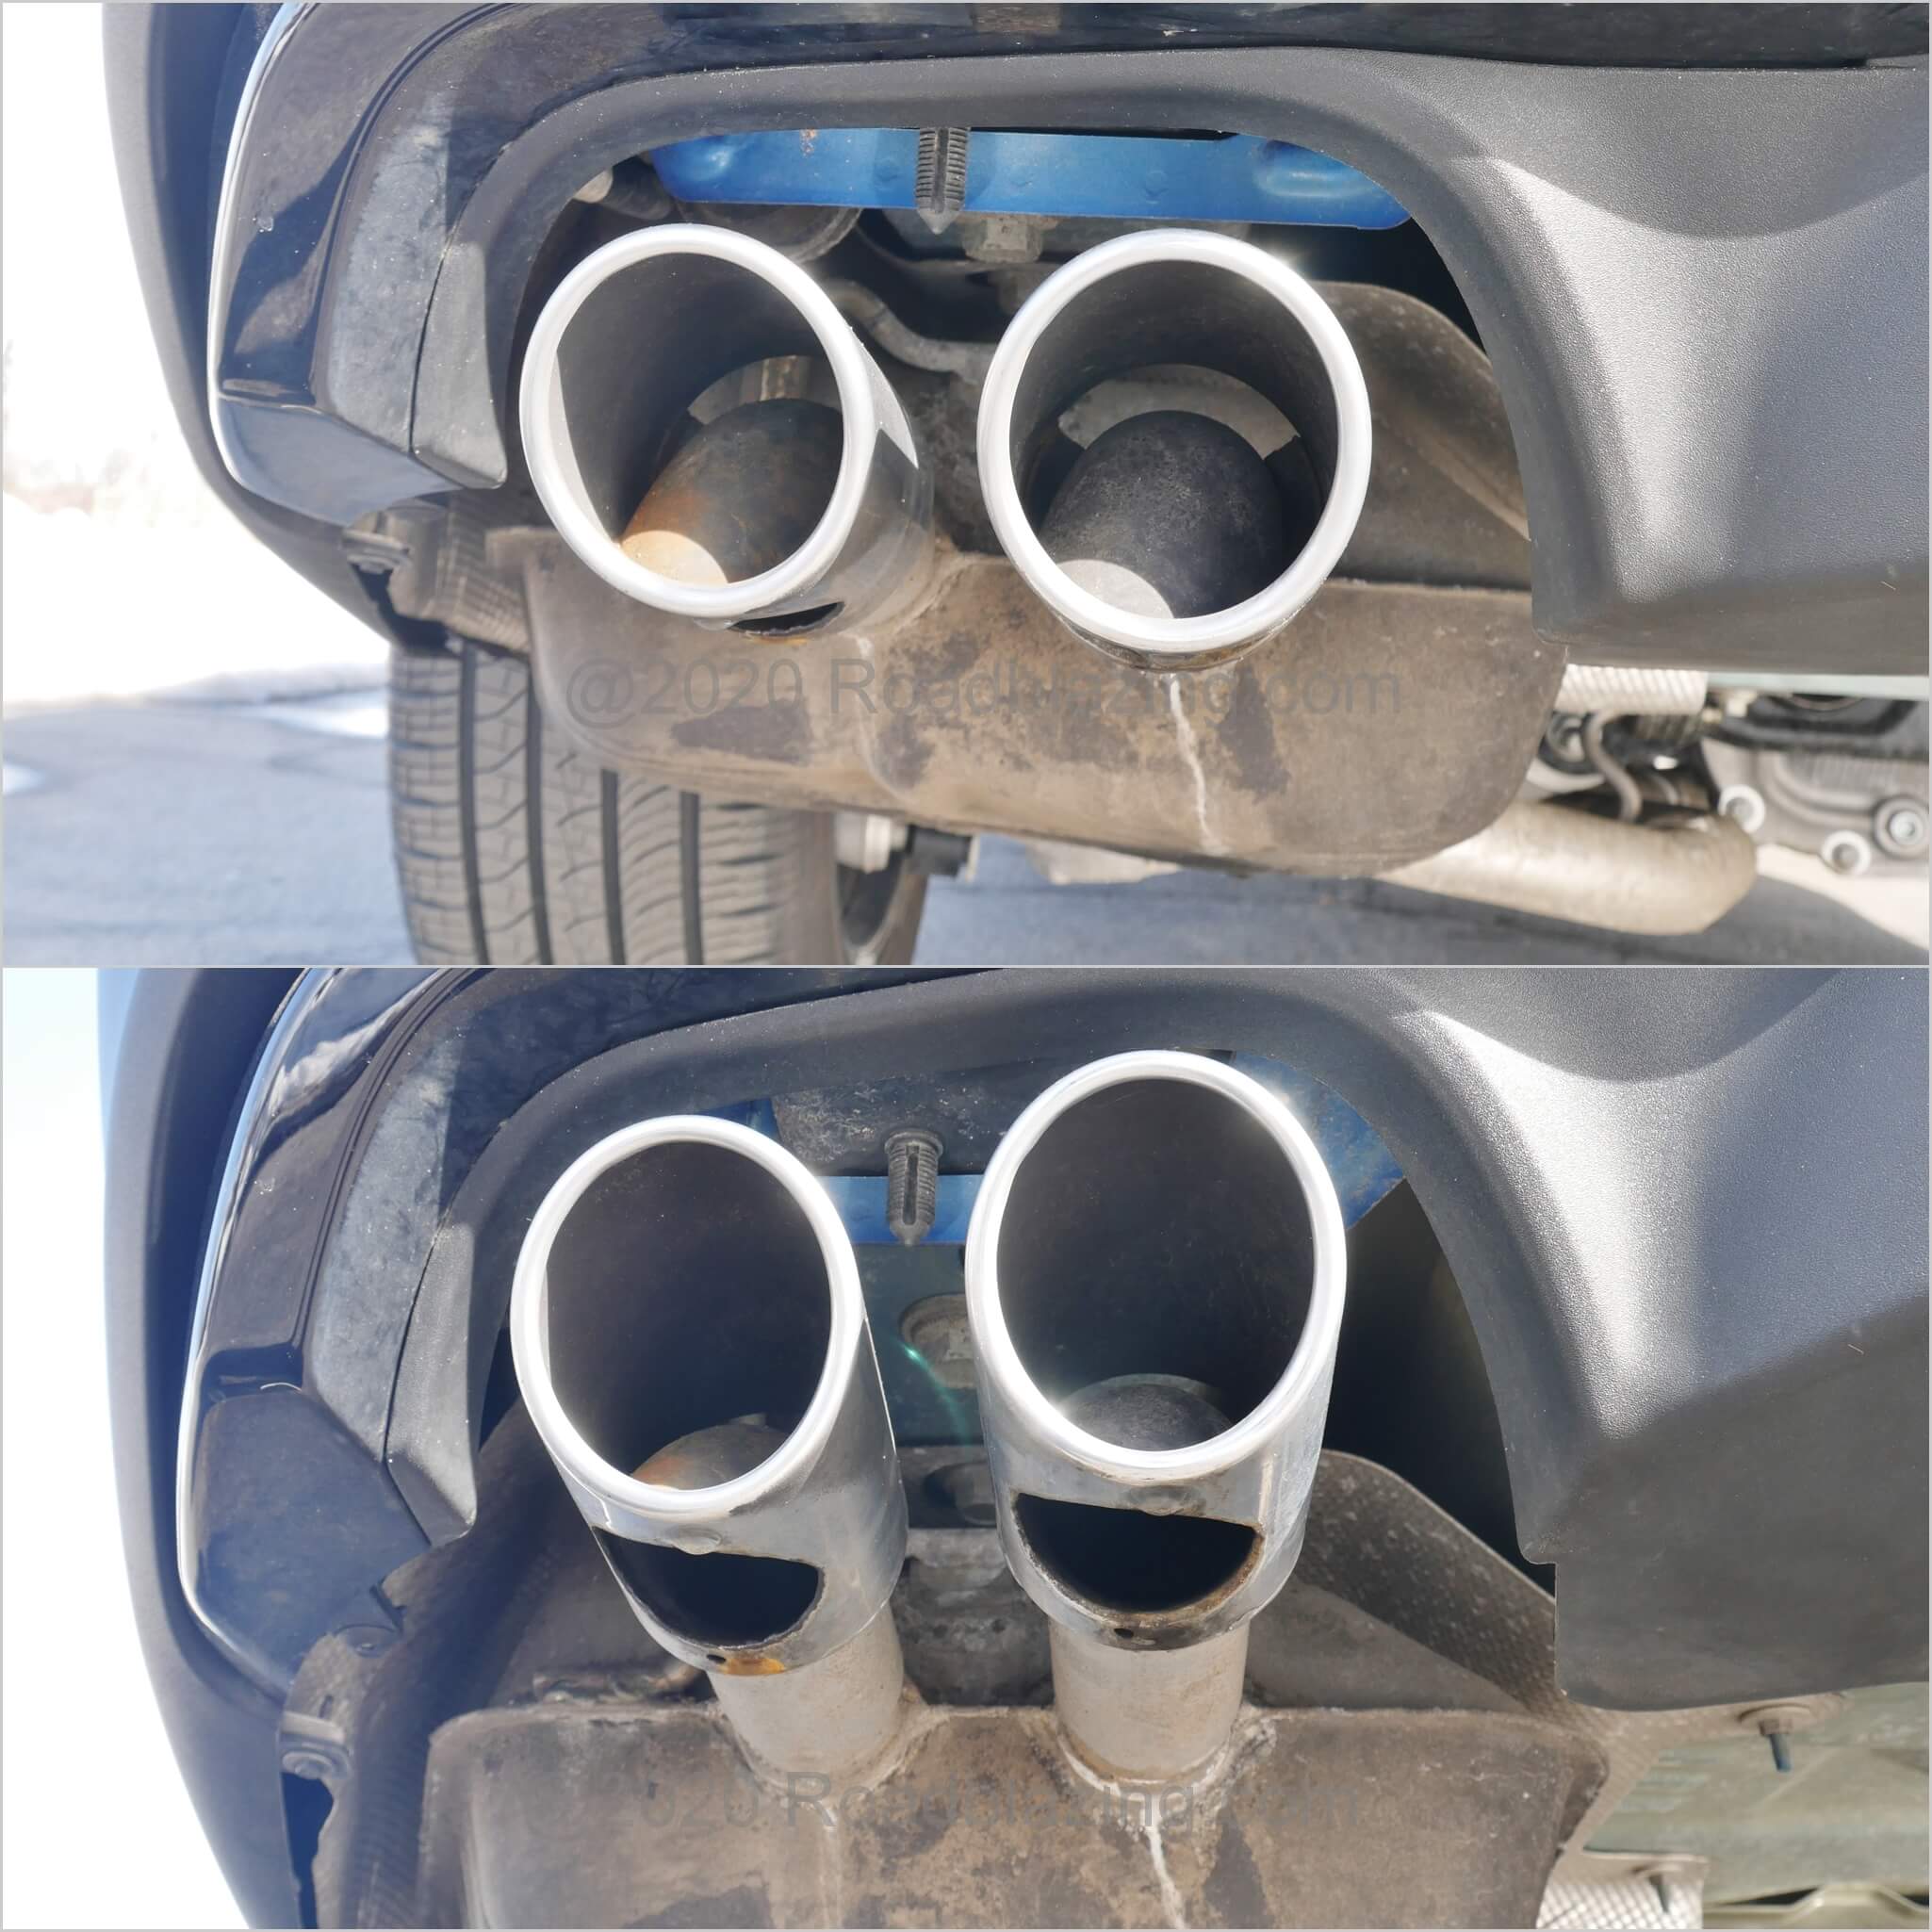 2020 Ford Explorer ST: Dual cat back exhaust turns down at the tail-pipes to keep the round chrome tips clean.